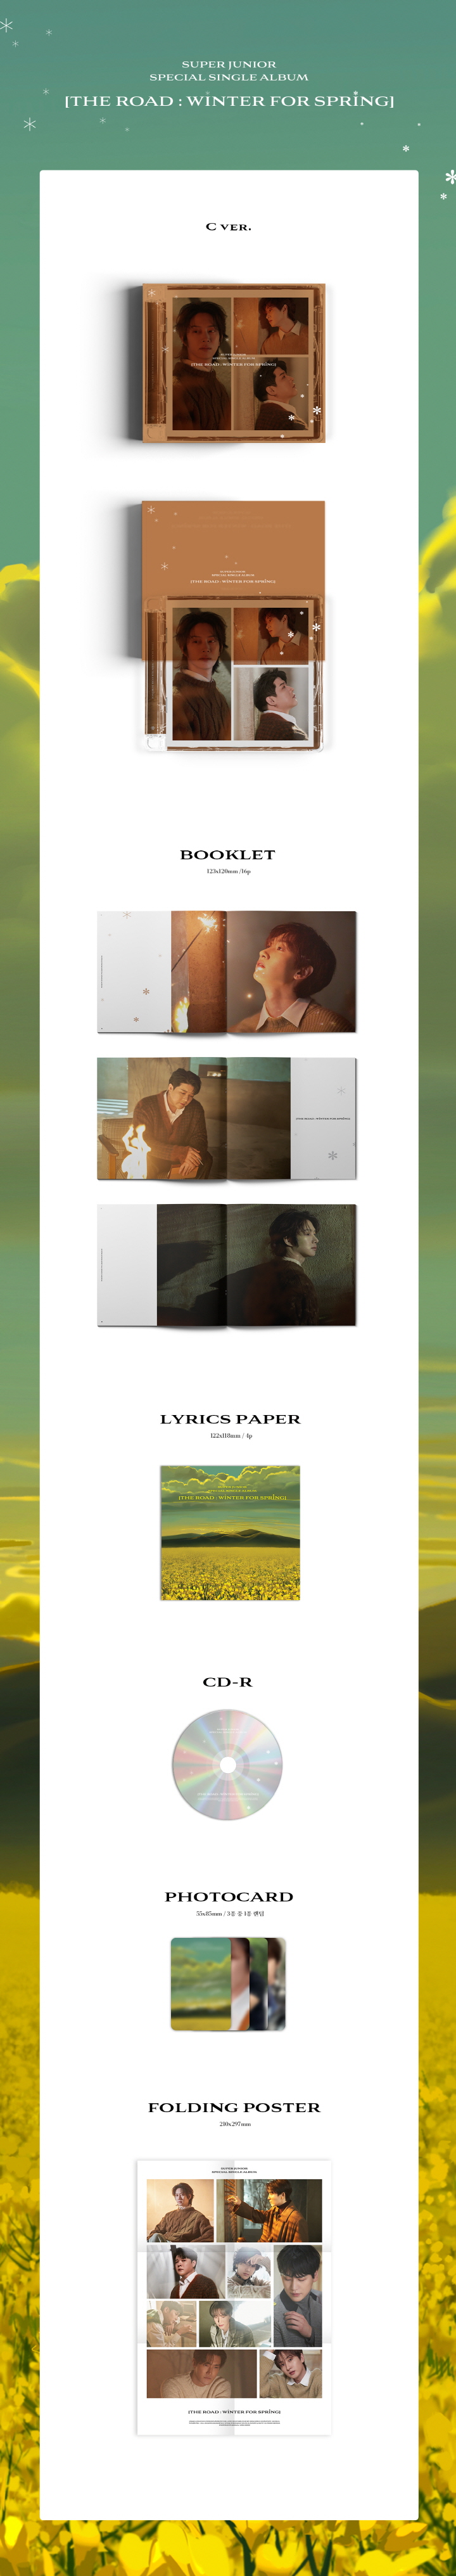 SUPER JUNIOR  The Road   Winter for Spring Limited Edition  C ver 